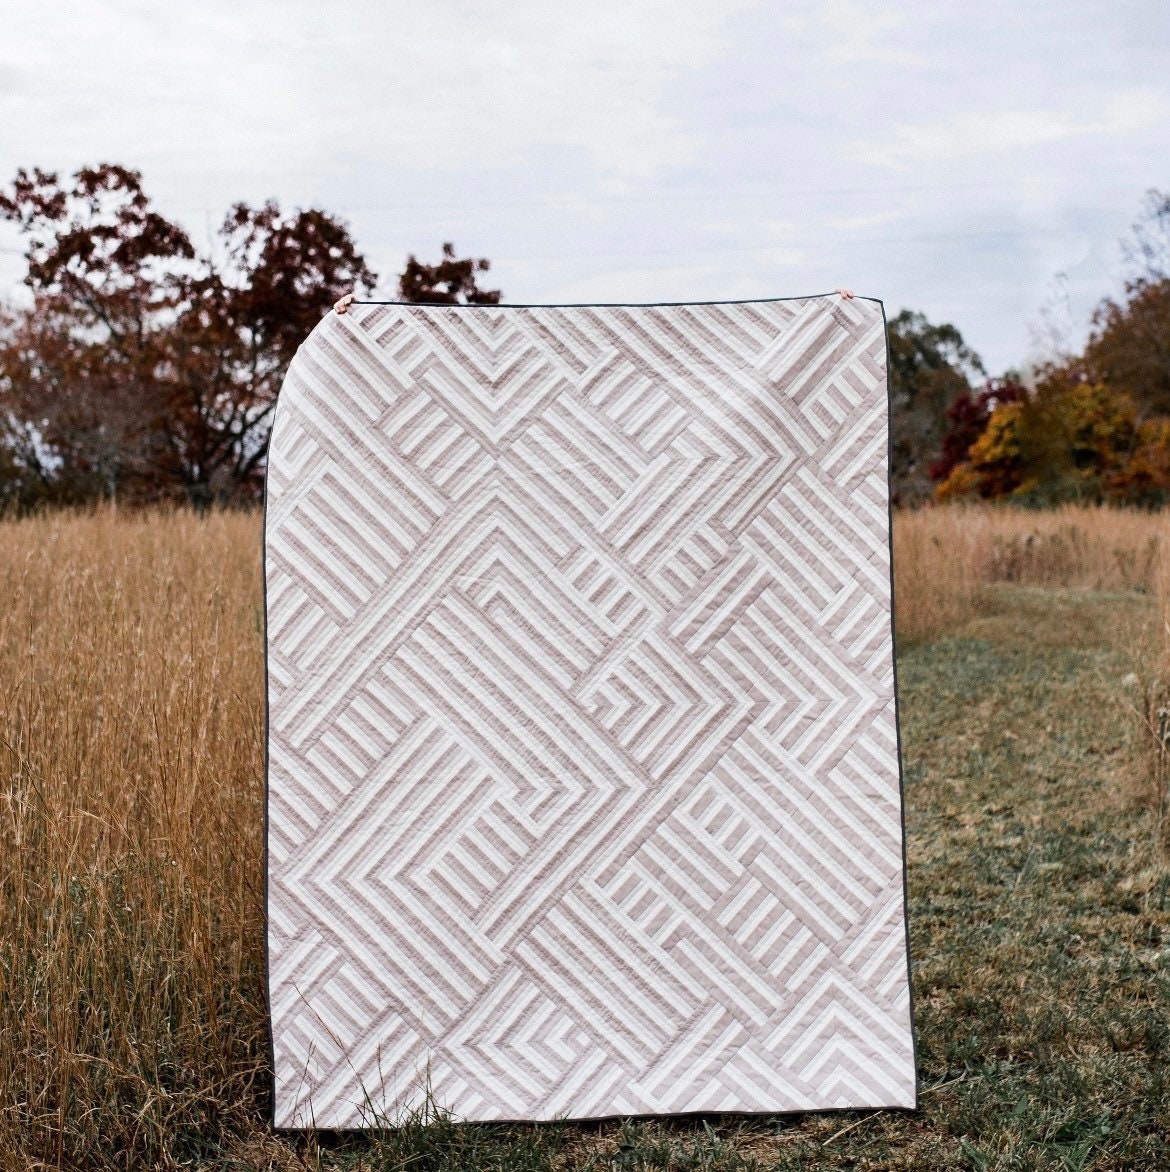 Interwoven Quilt Pattern by Brittany Lloyd for Lo & Behold Stitchery (paper copy)